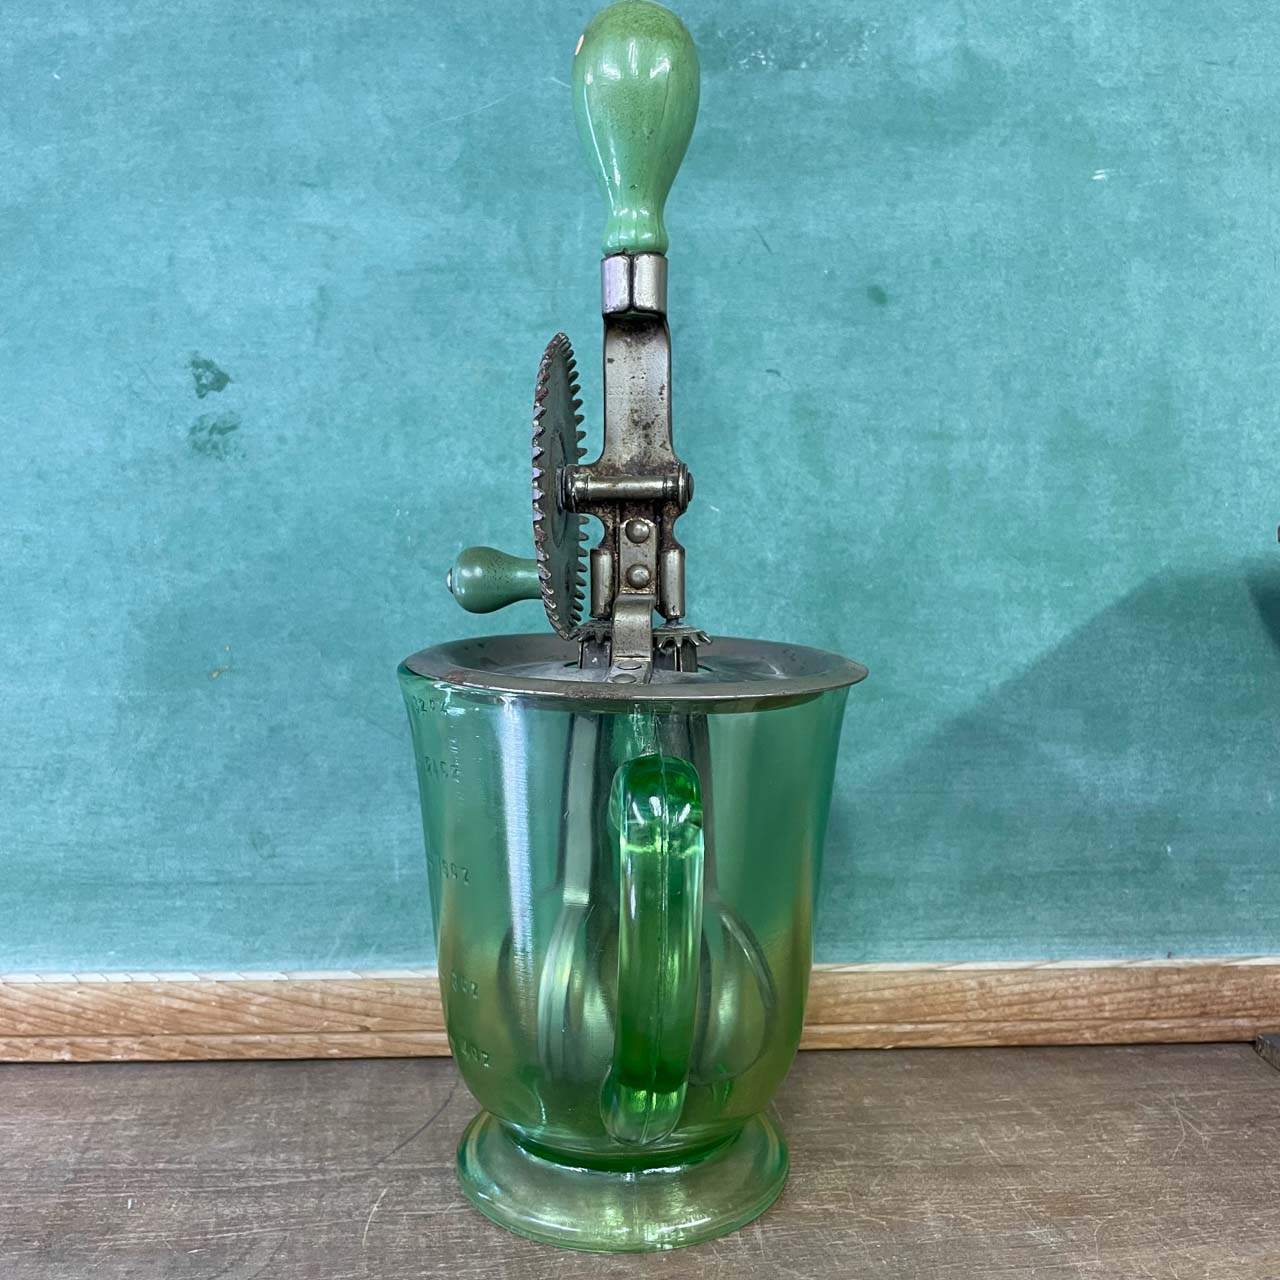 https://thejunkparlor.com/wp-content/uploads/2022/03/green-glass-4-cup-hand-mixer-beater-kitchen-vintage-0.jpeg